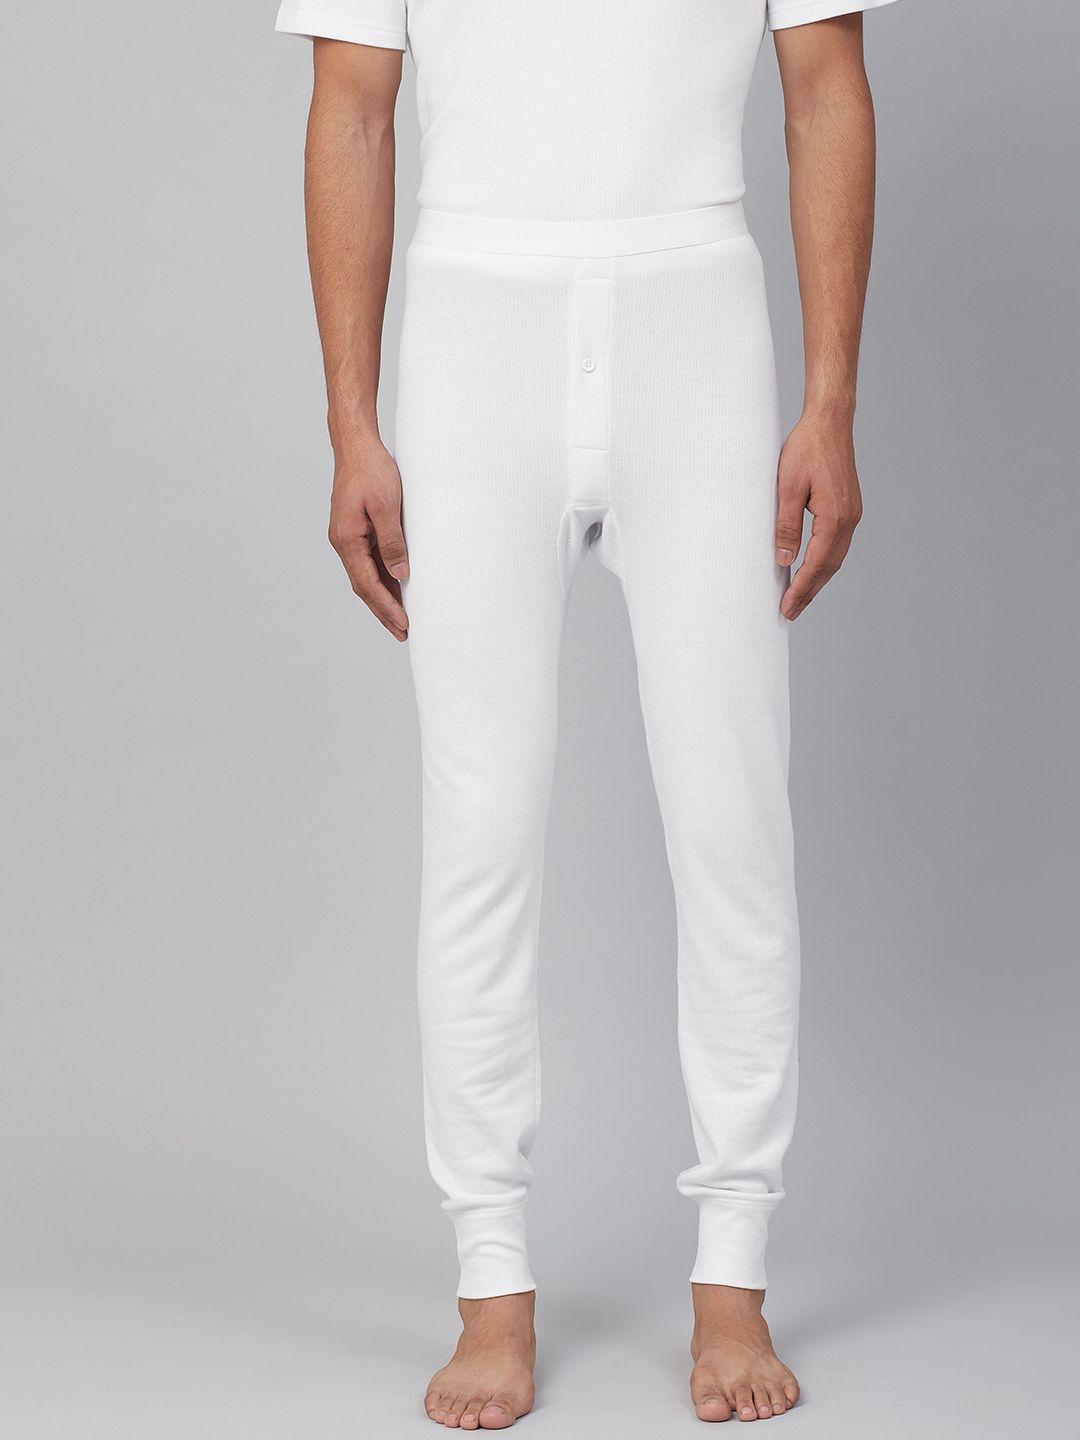 marks & spencer men white ribbed joggers thermal bottoms